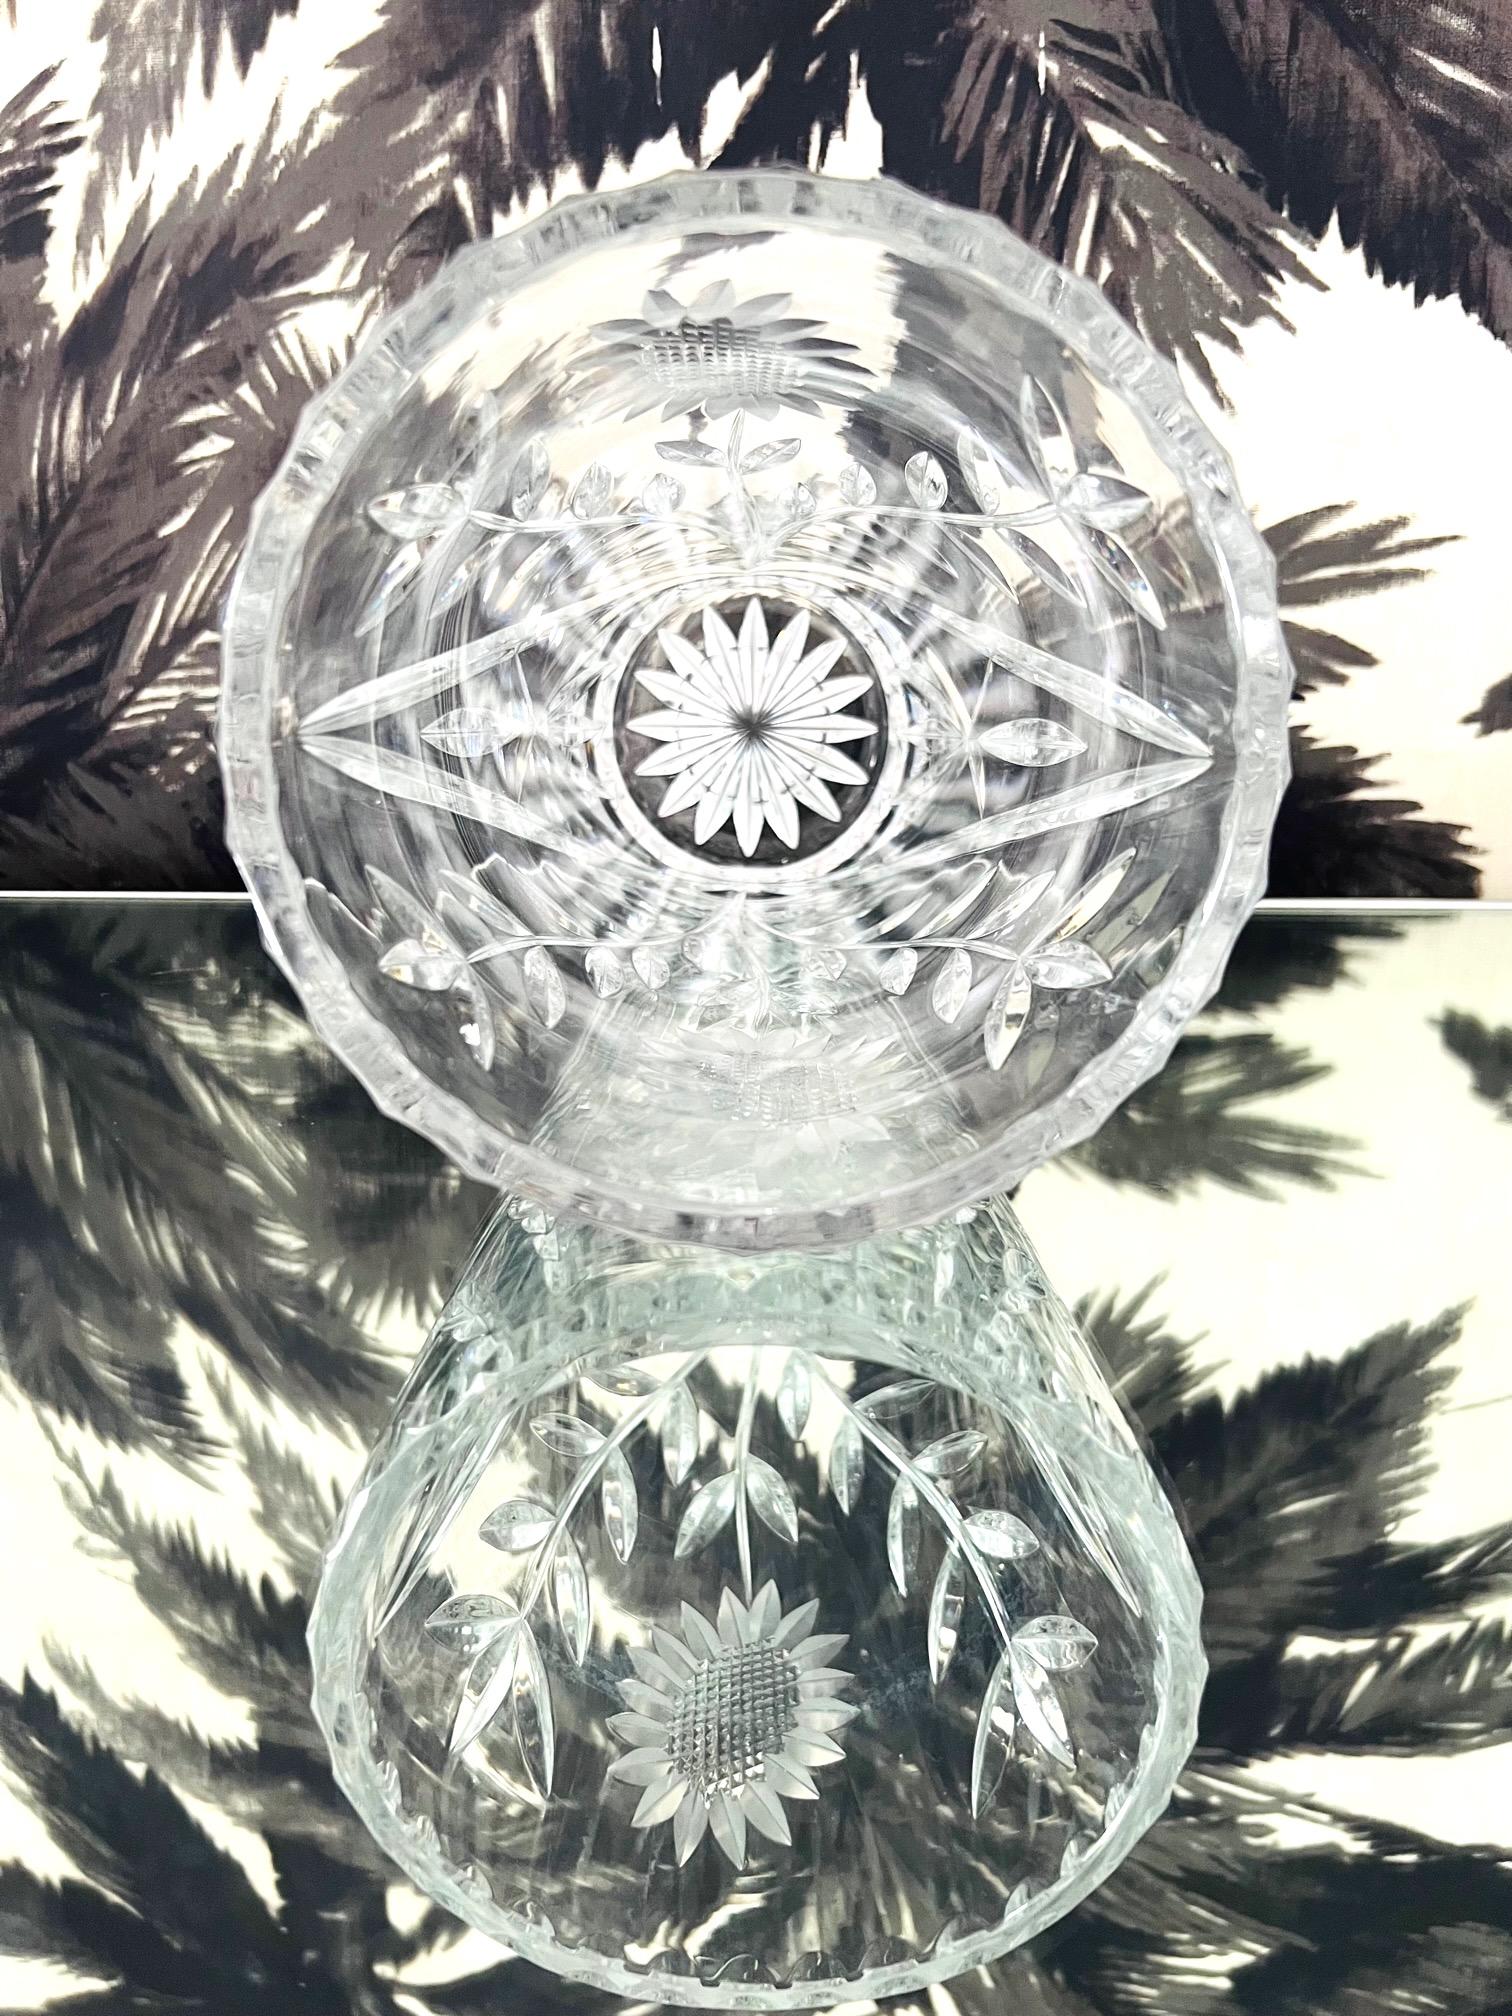 Waterford Crystal Etched Sunflower Vase with Cut Glass Designs, England, c. 2010 For Sale 2